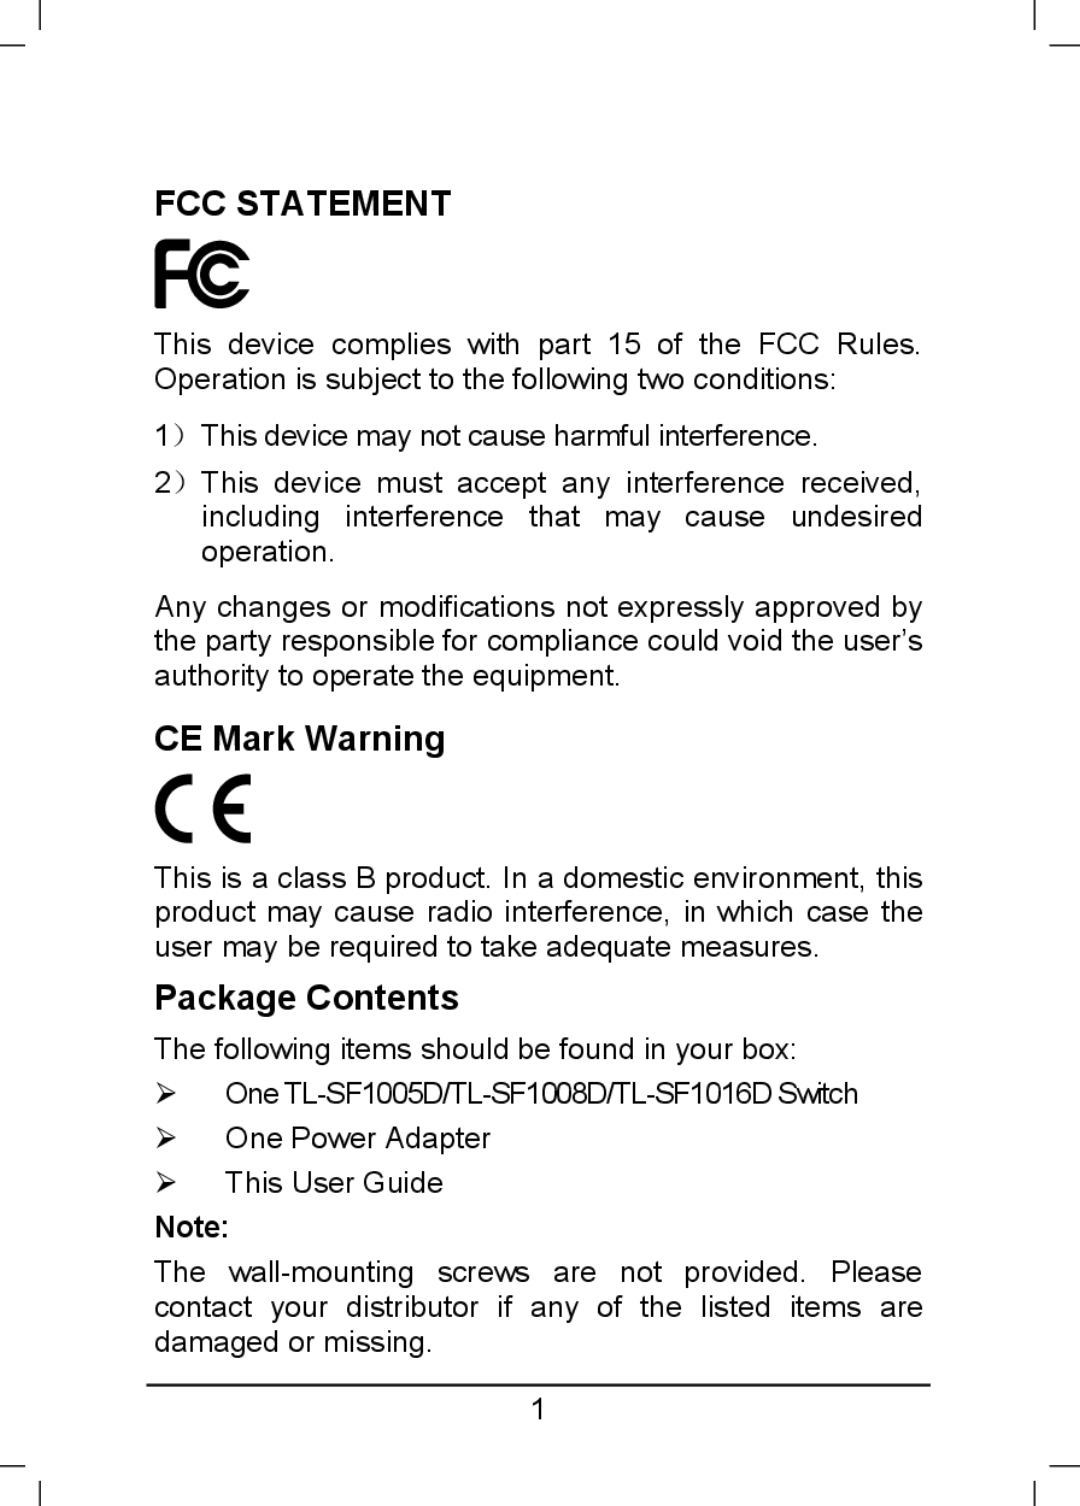 TP-Link TL-SF1016D, TL-SF1008D, TL-SF1005D manual Fcc Statement, CE Mark Warning, Package Contents 